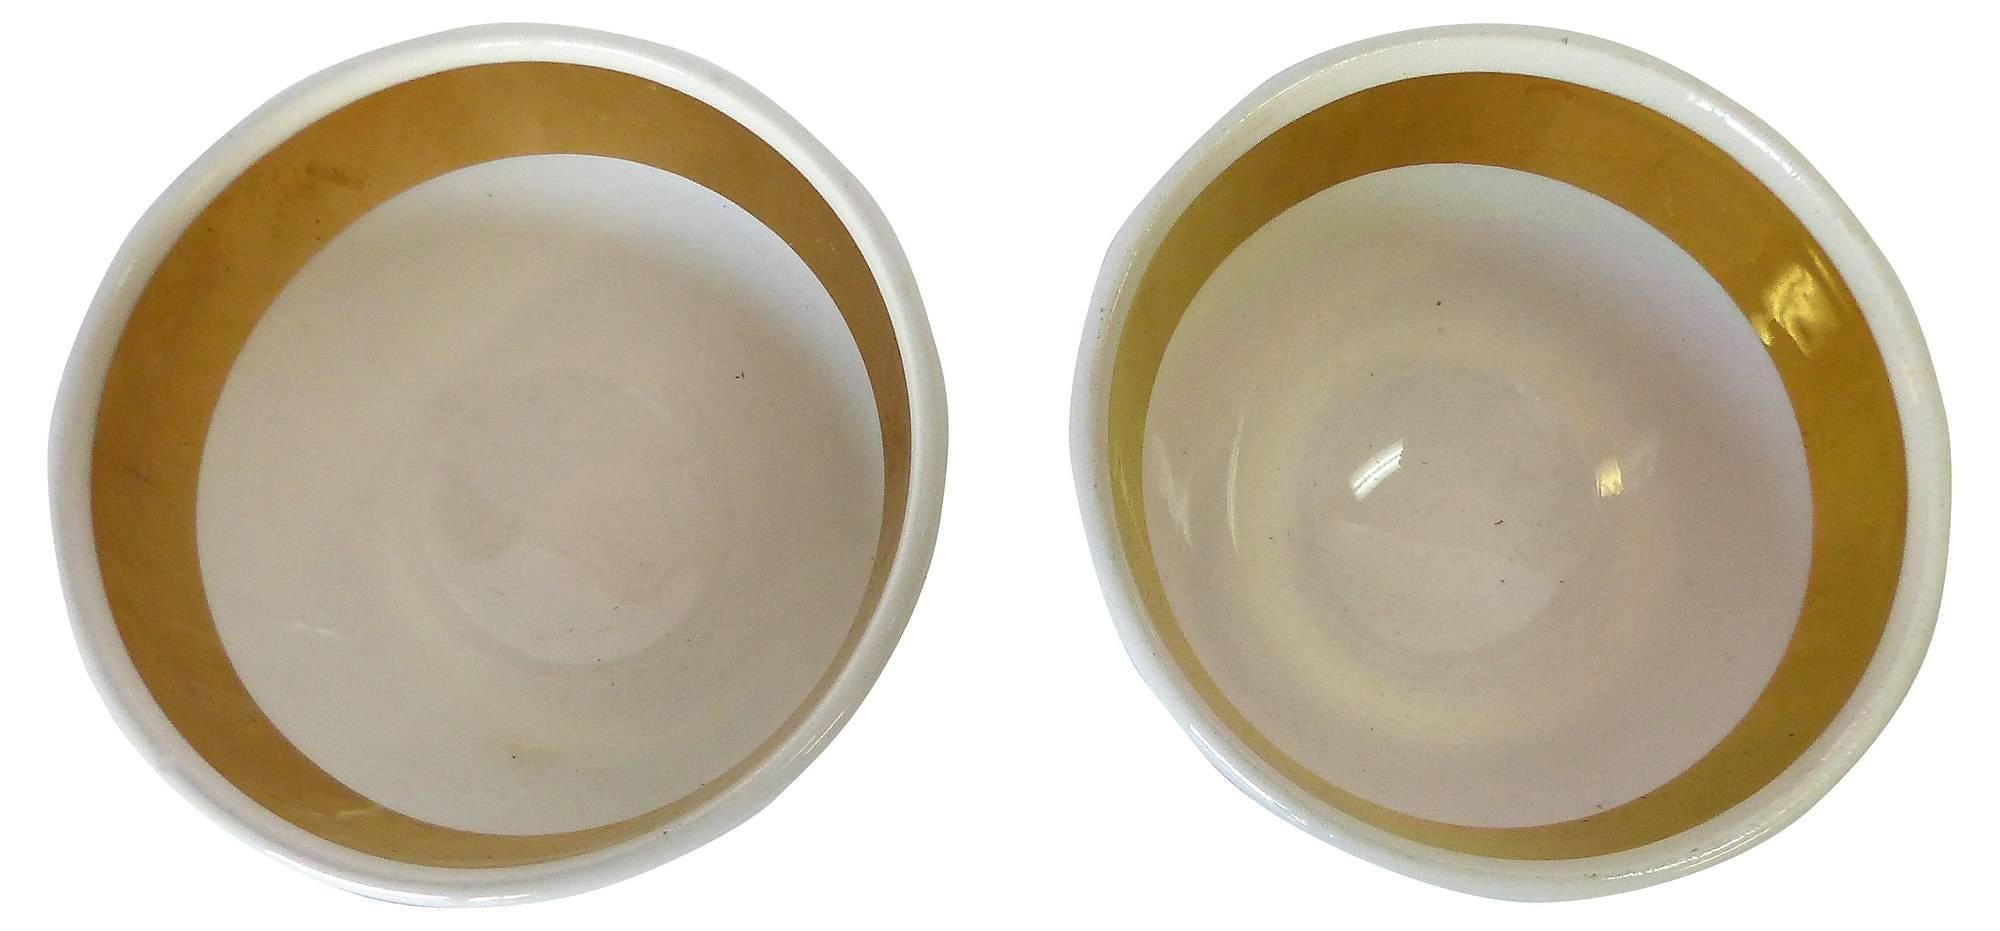 Pair of lithographic design porcelain appetizer bowls with gilt accents and labeled "Almonds" and "Sausages" designed by Piero Fornasetti. Marked Fornasetti on undersides. Rubbed black finish on one bowl. 


  